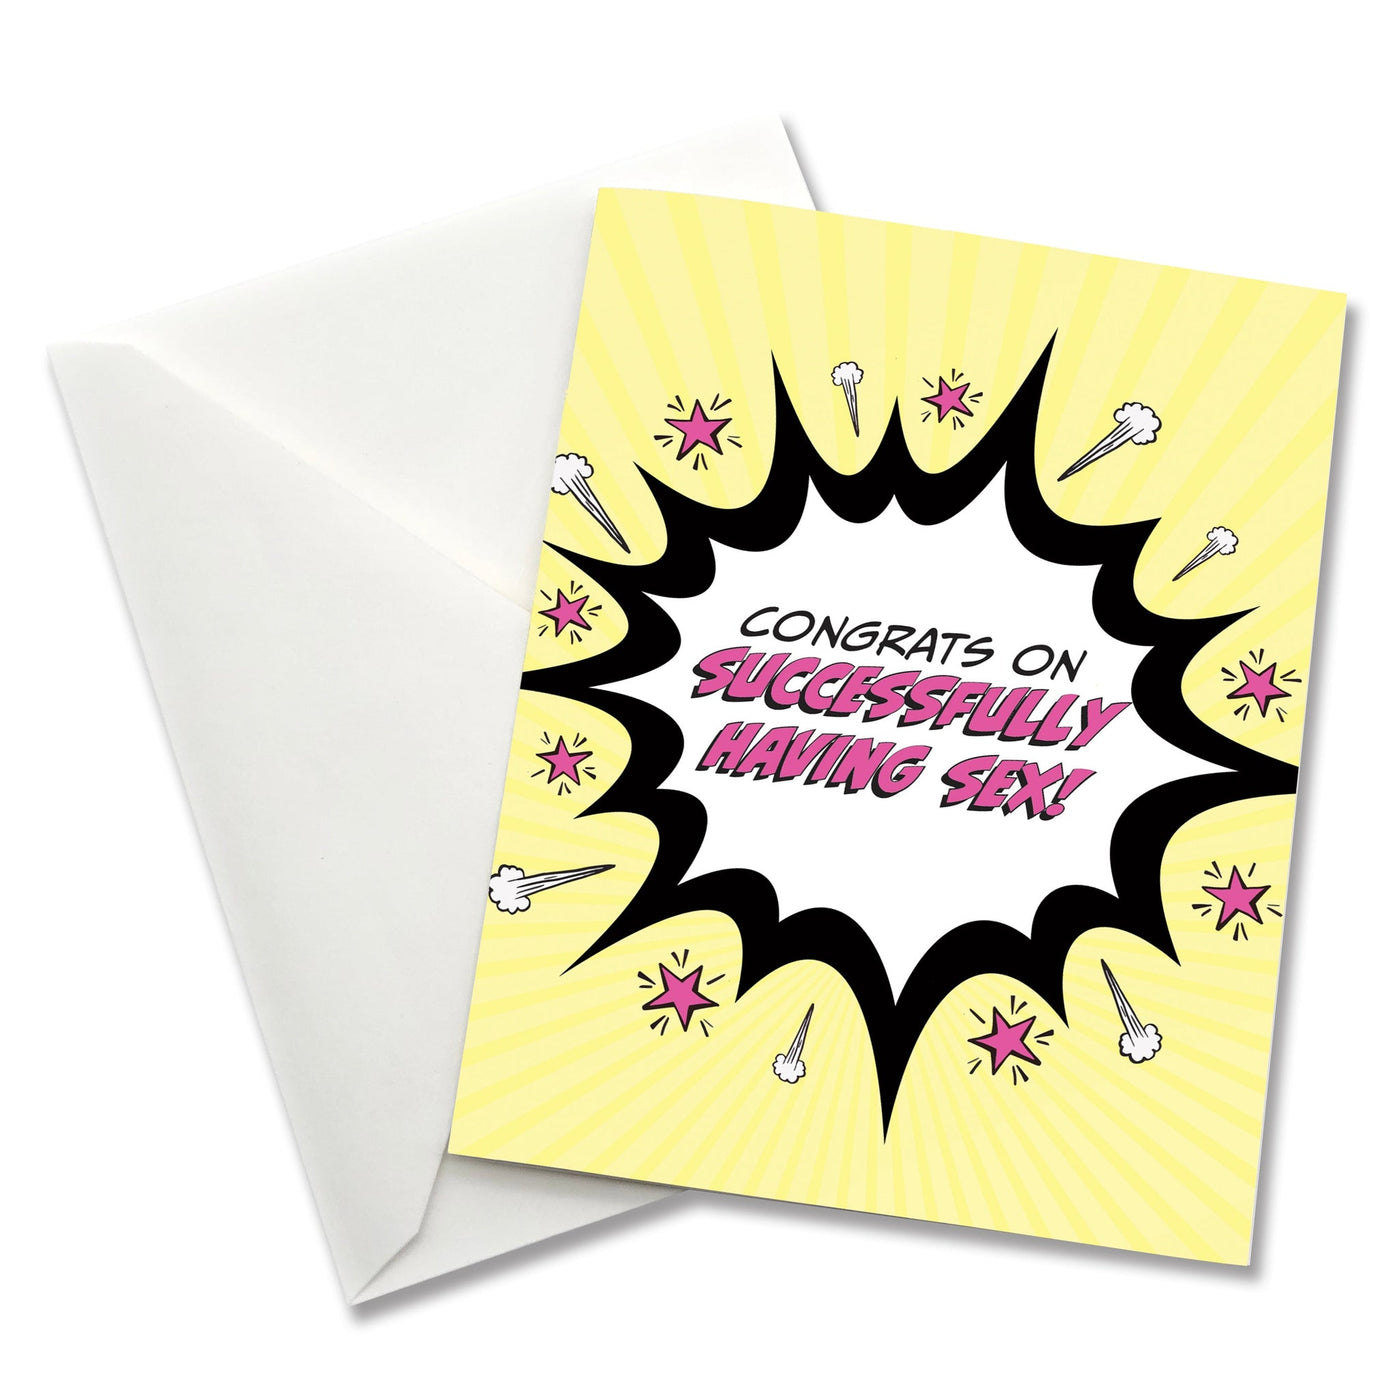 Congrats On Successfully Having Sex New Baby Greeting Card